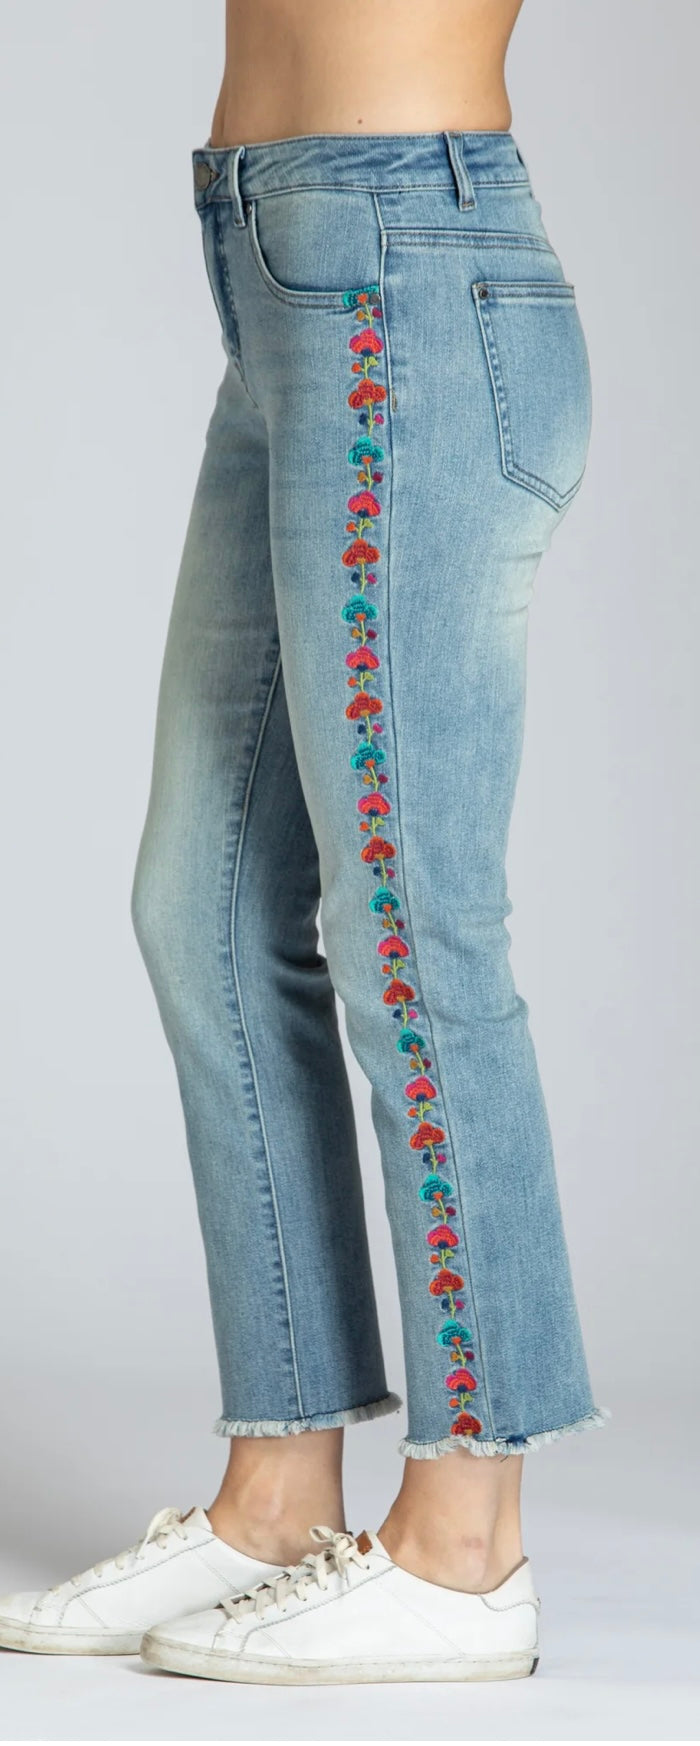 Straight Leg crop jean with floral embroidery - Light Indigo